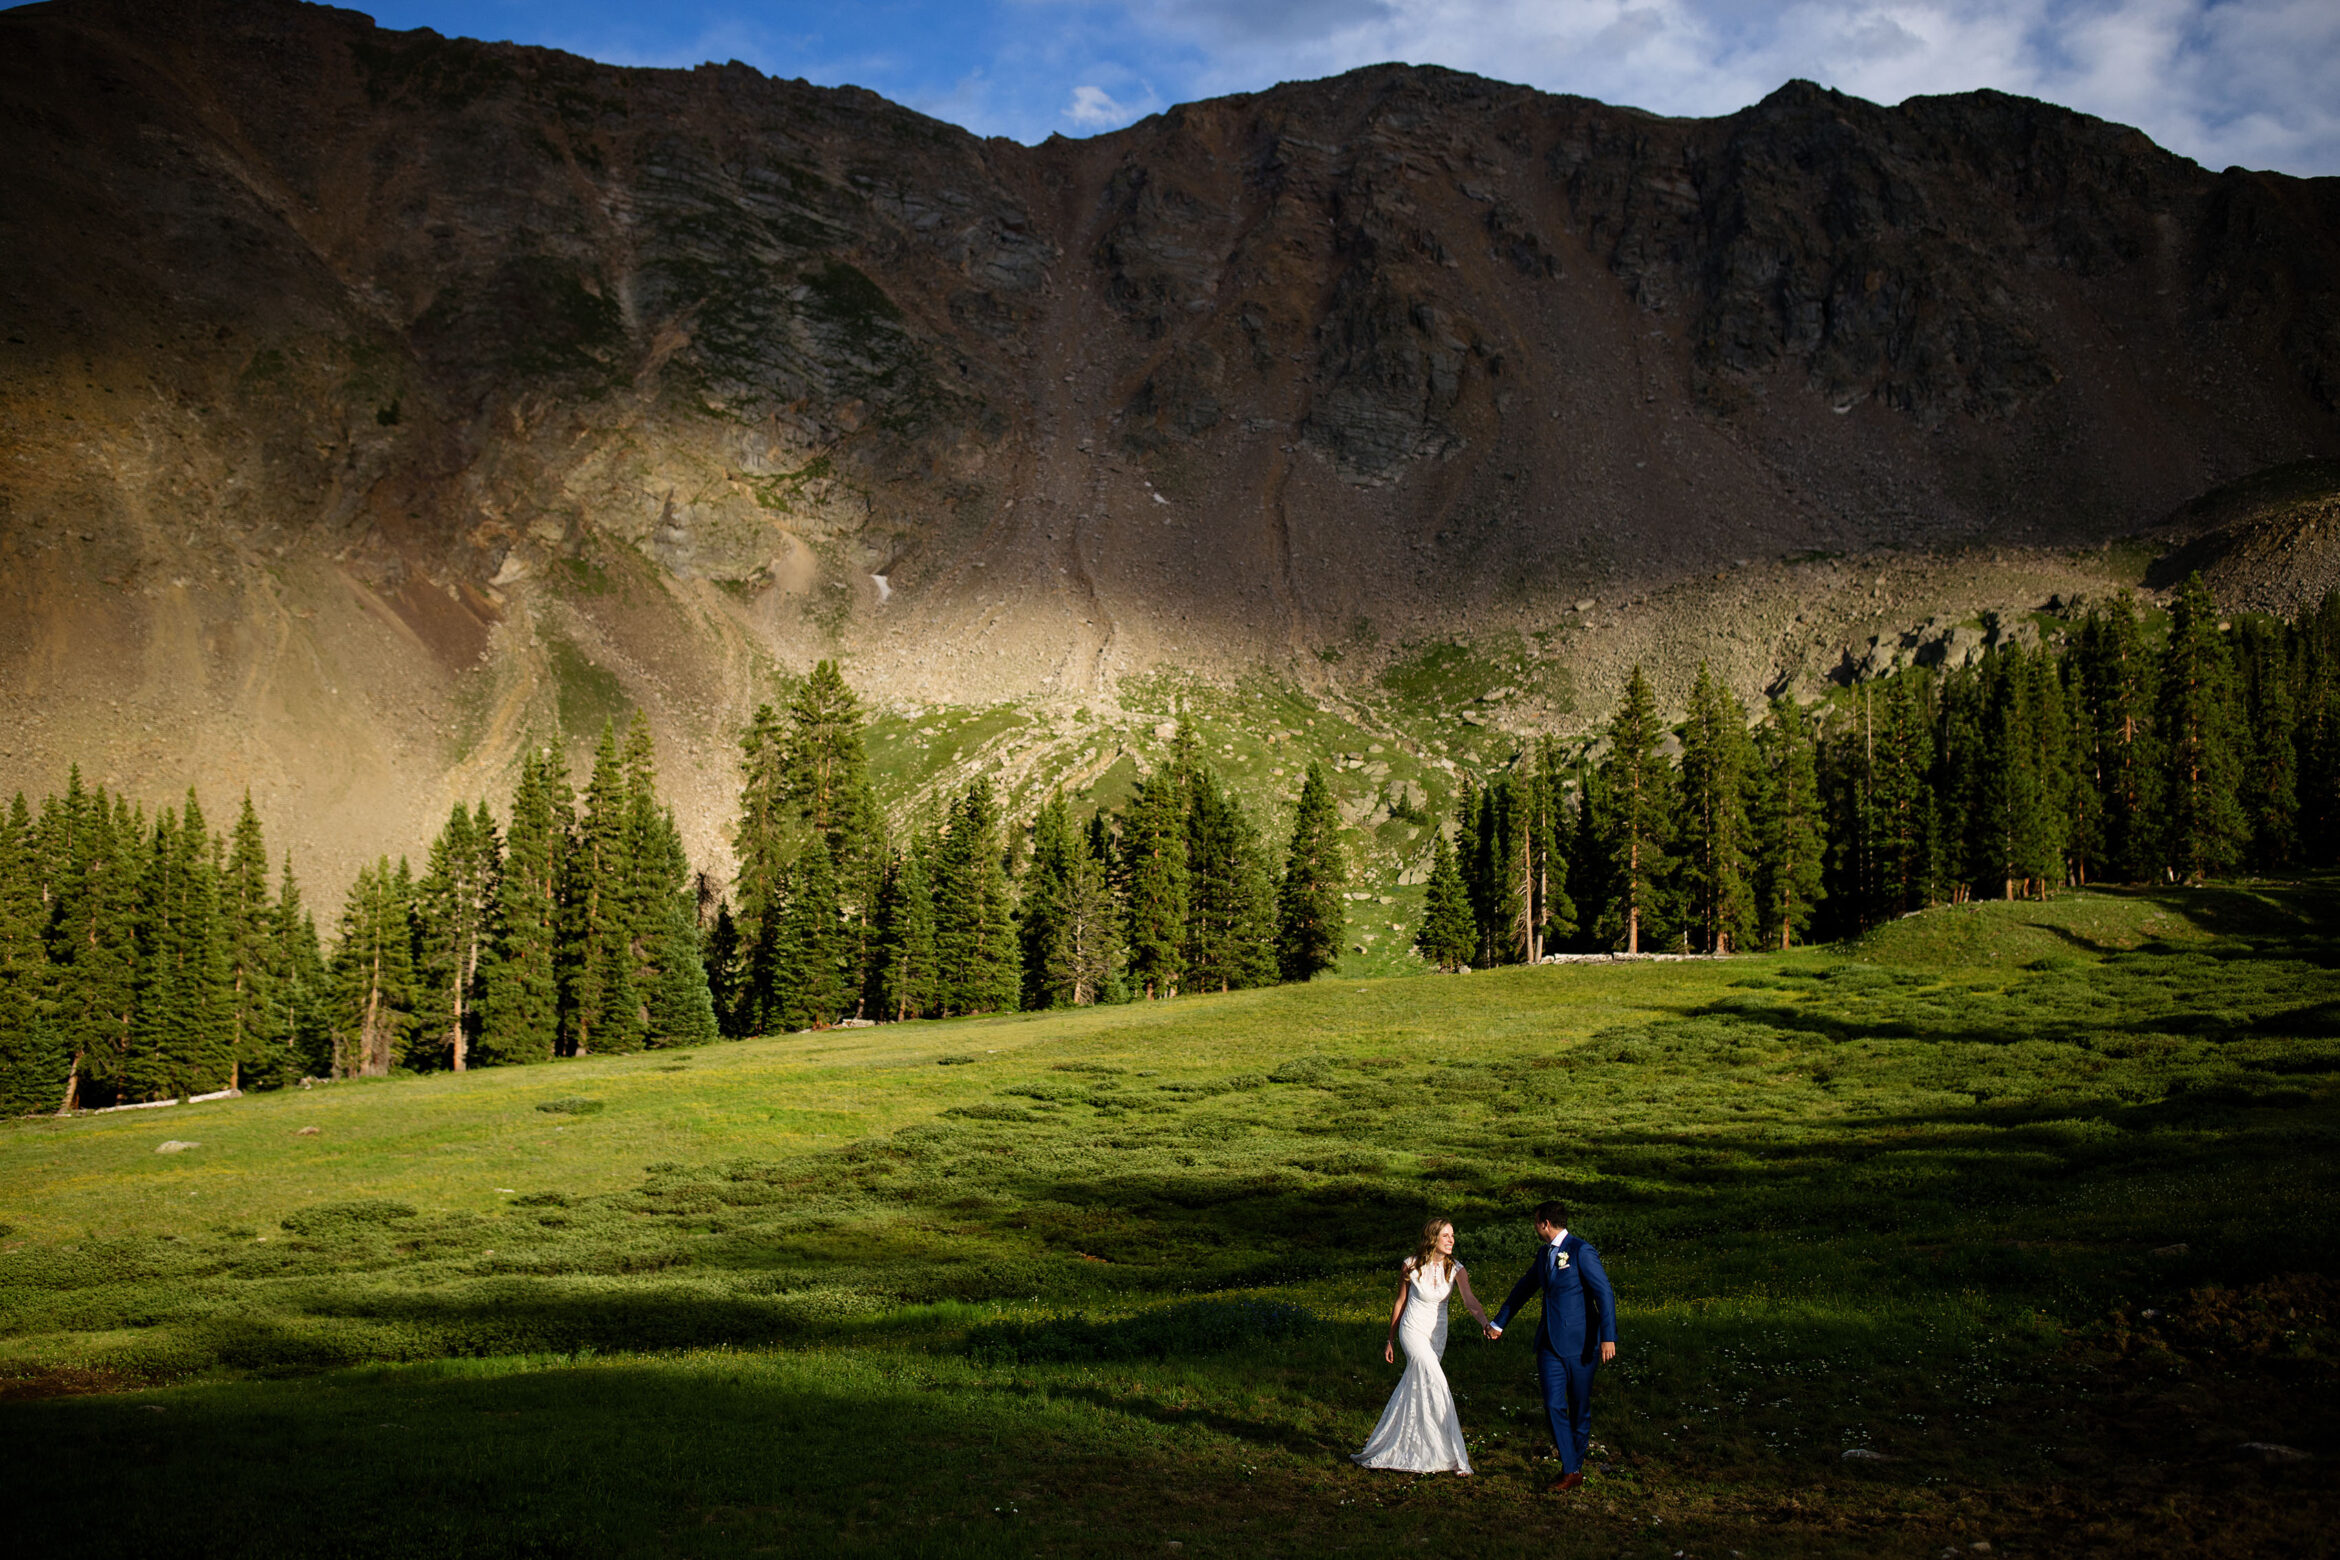 The bride and groom walk through a shaft of light at Arahoe Basin